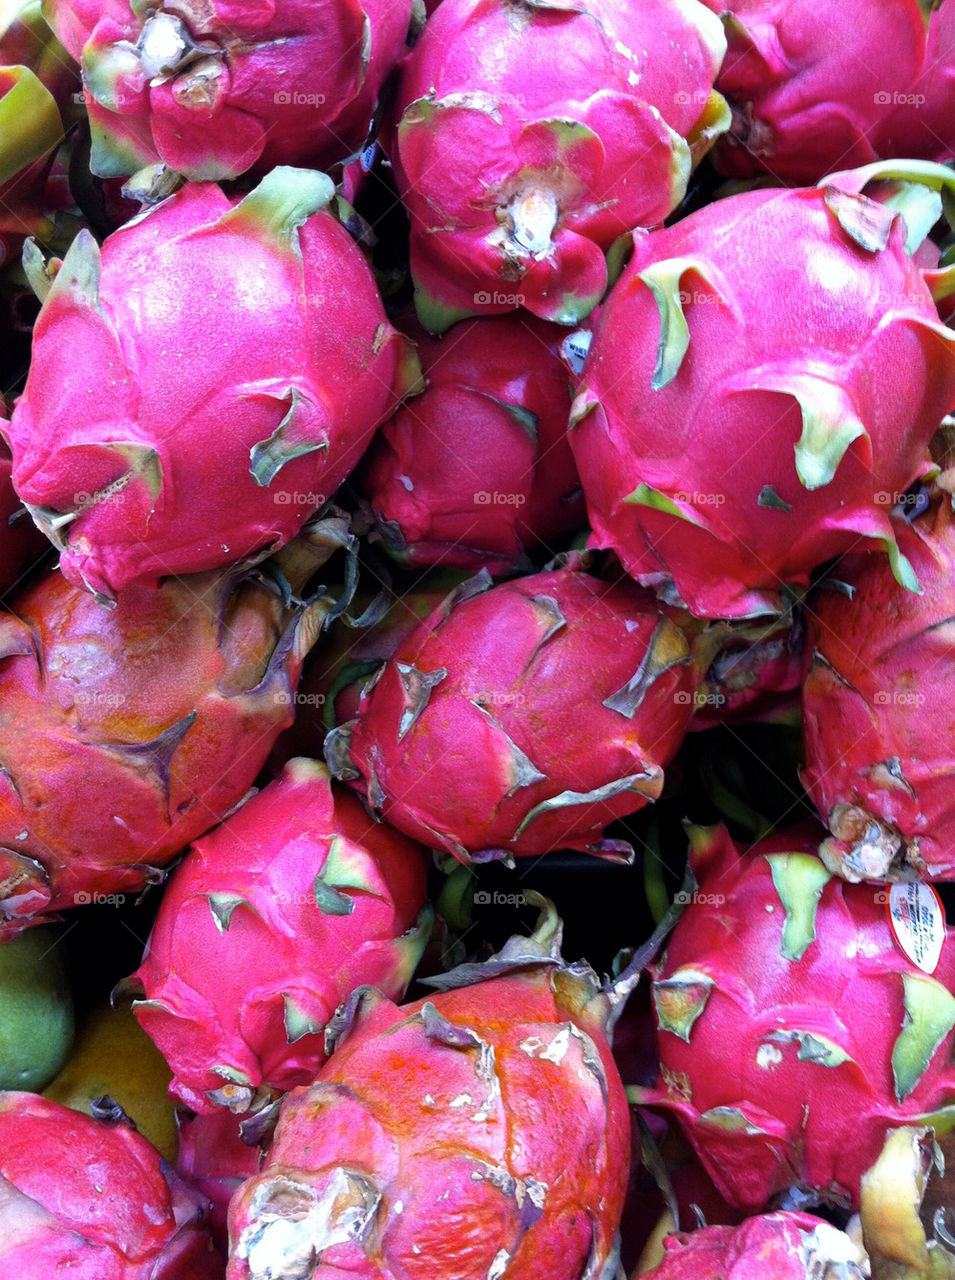 Dragonfruit at a located at a midwestern supermarket.